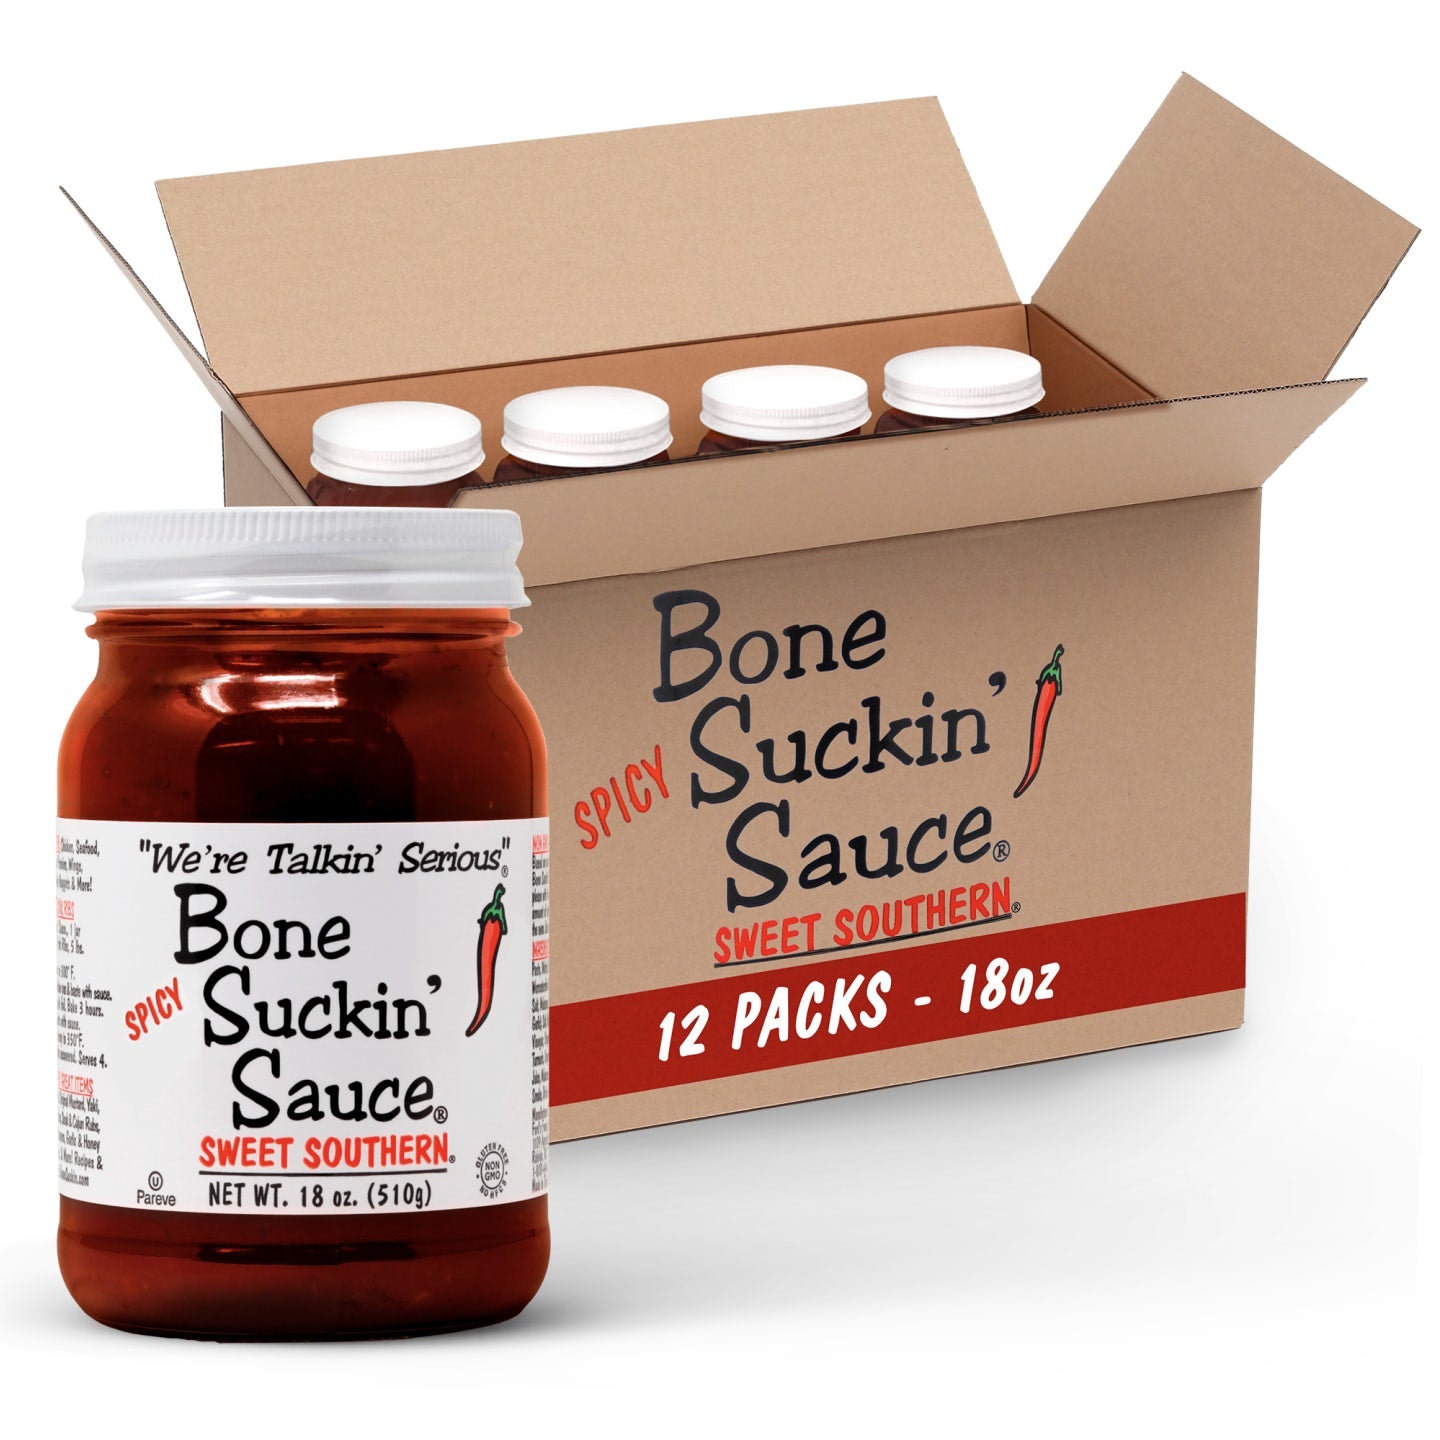 Bone Suckin' Sauce Sweet Southern Spicy BBQ Sauce - 18 oz in Glass Bottle, For Ribs, Chicken, Pork, Beef - Gluten-Free, Non-GMO, Kosher, Spicy Barbecue Sauce Sweetened with Cane Sugar & Molasses. 12 pack